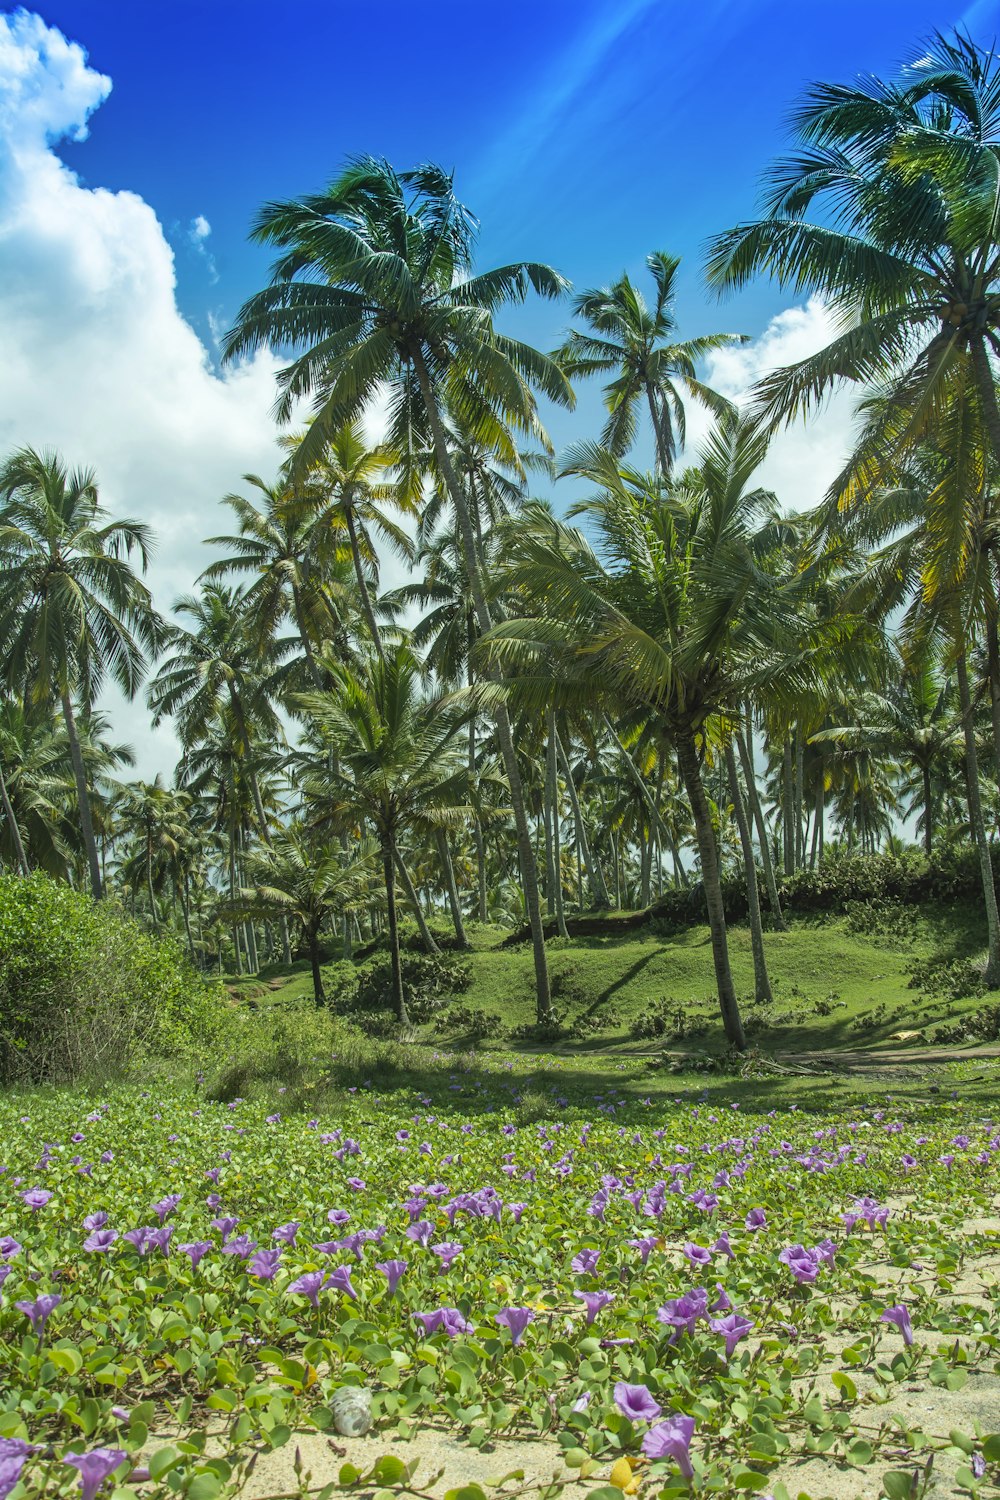 a lush green field with purple flowers and palm trees